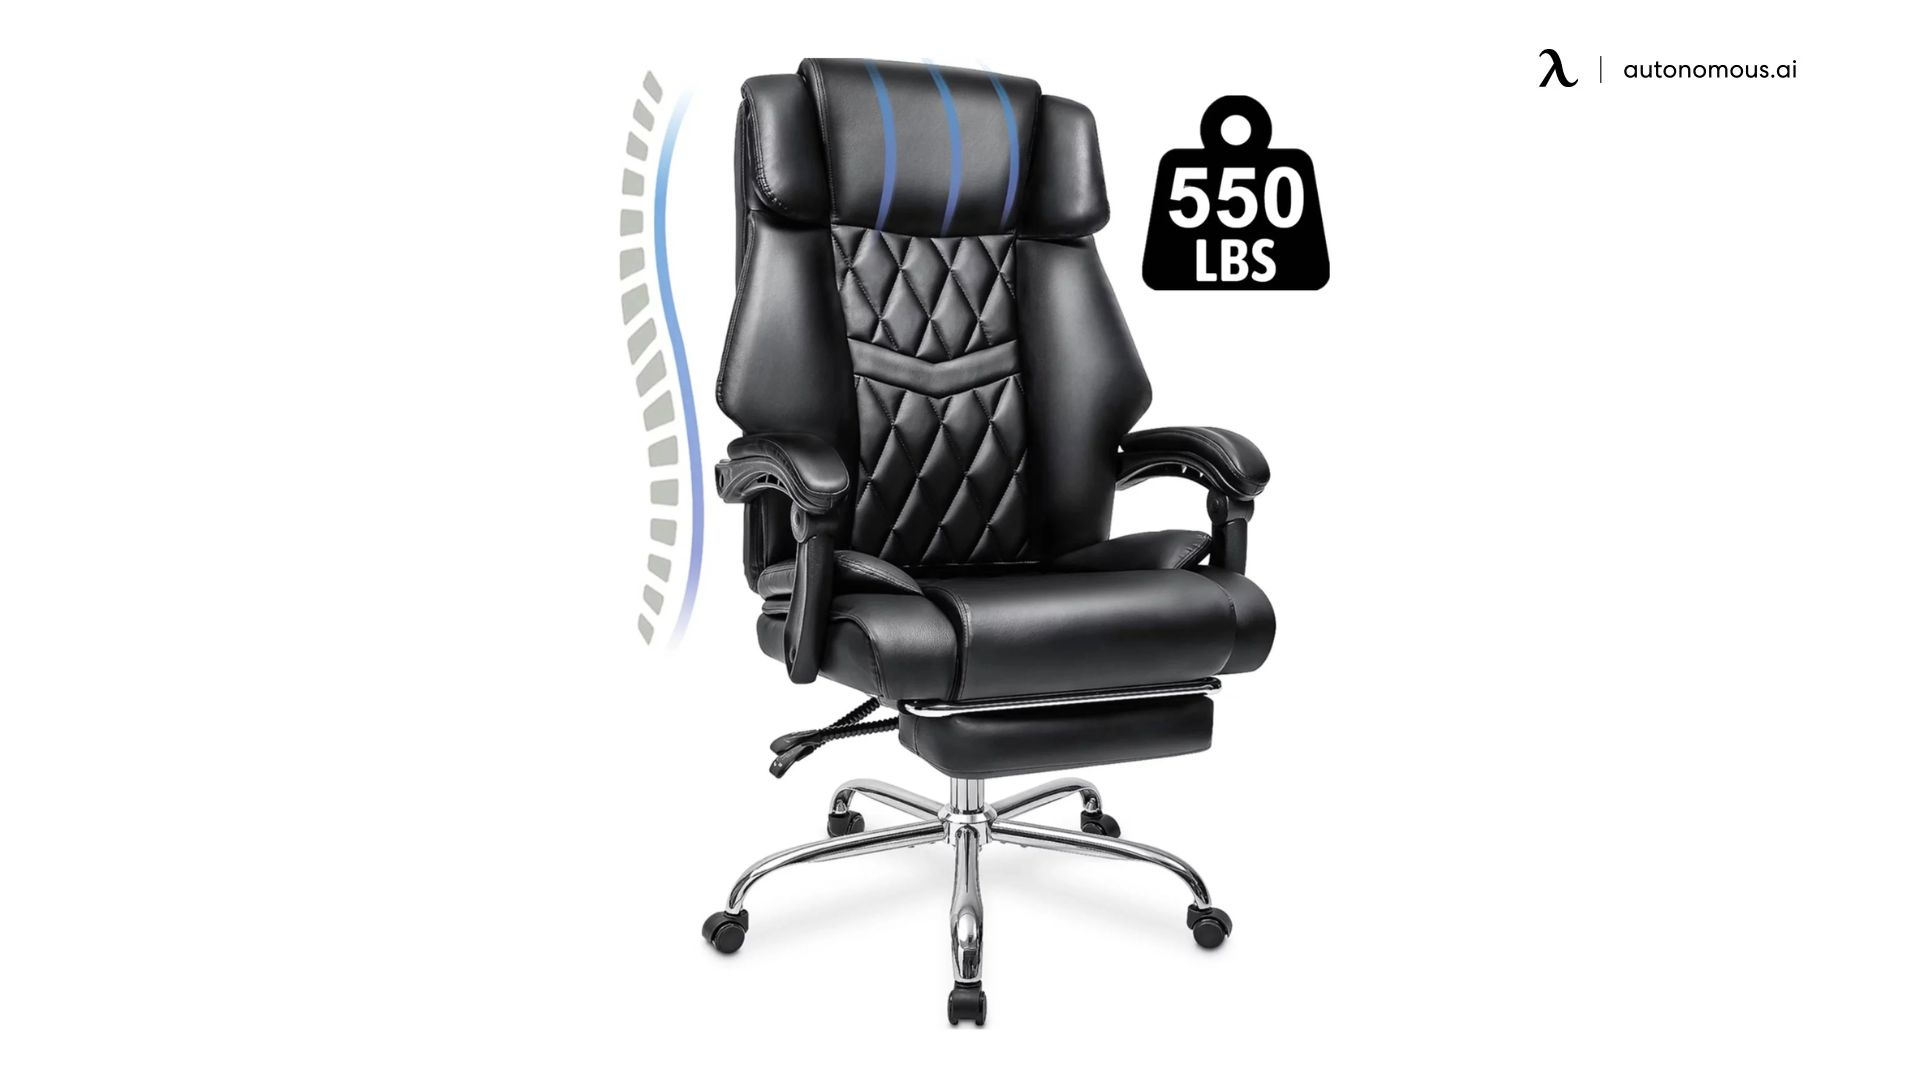 Hoffree Big and Tall Office Chair